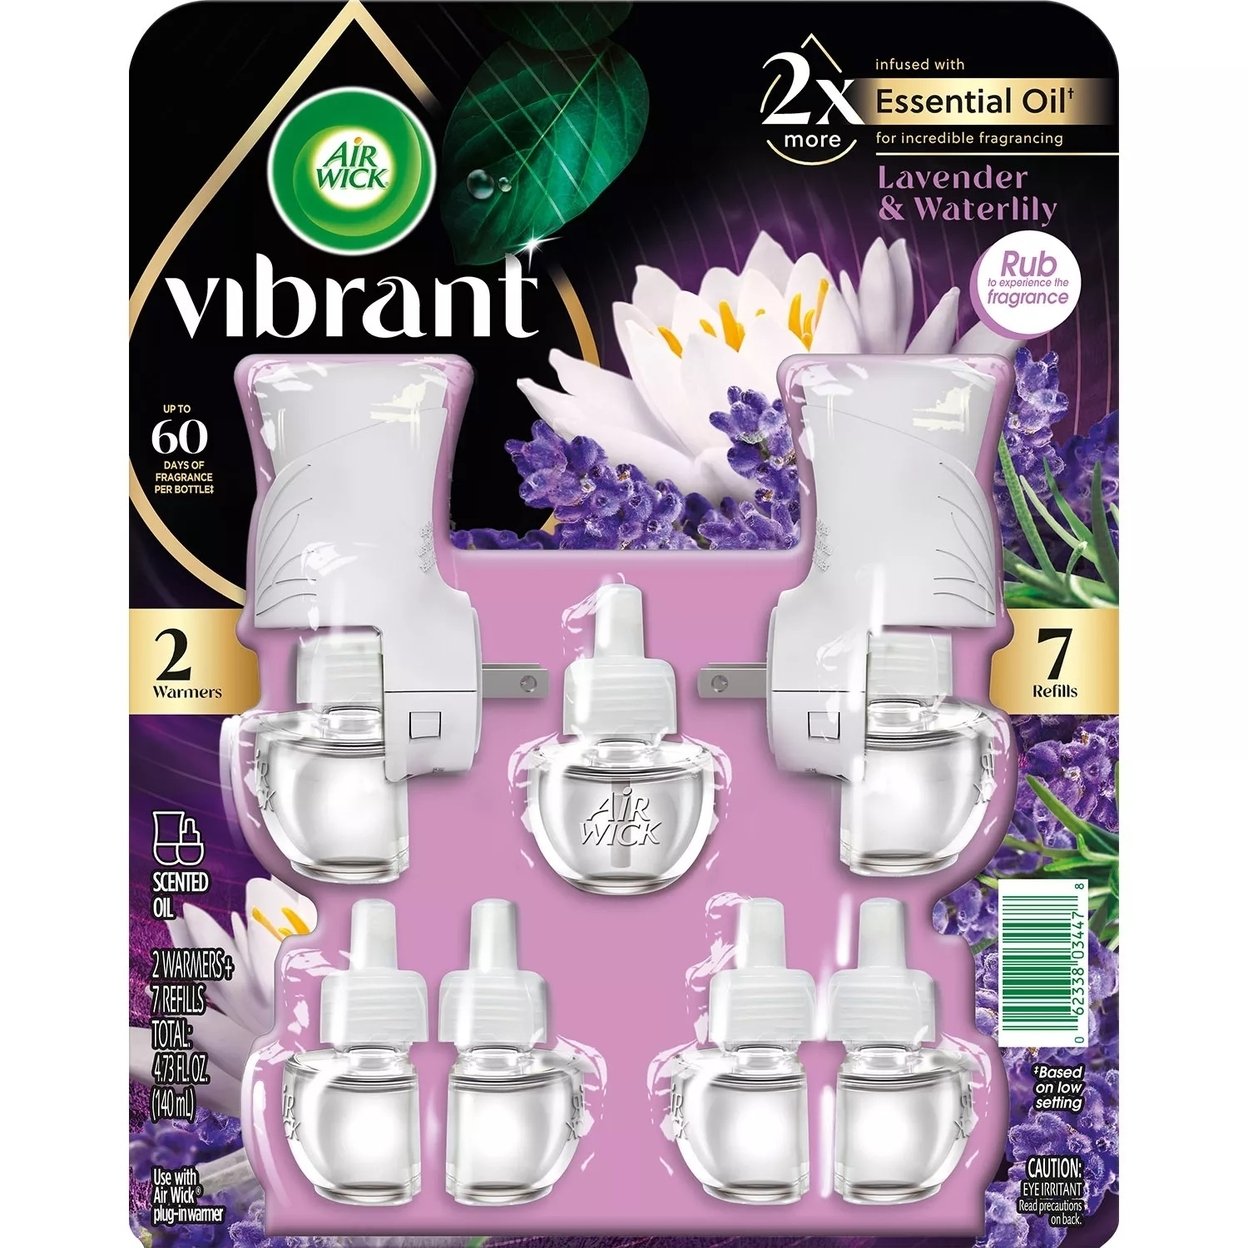 Air Wick Vibrant Scented Oil, Lavender & Waterlily (2 Warmers + 7 Oils)